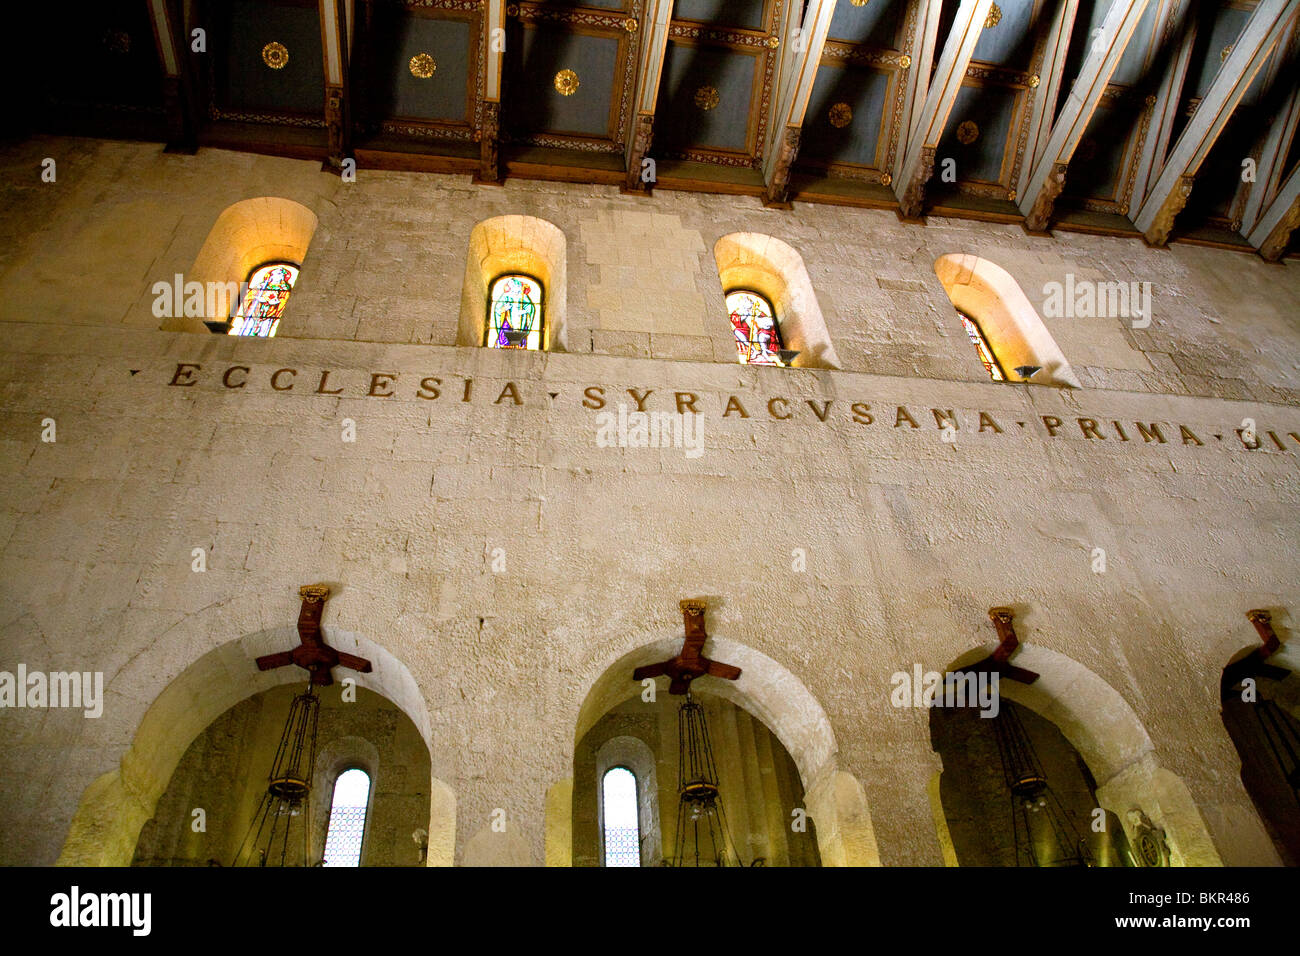 Italy, Sicily, Siracuse, Ortygia; The splendid interior of the Cathedral of Ortygia Stock Photo